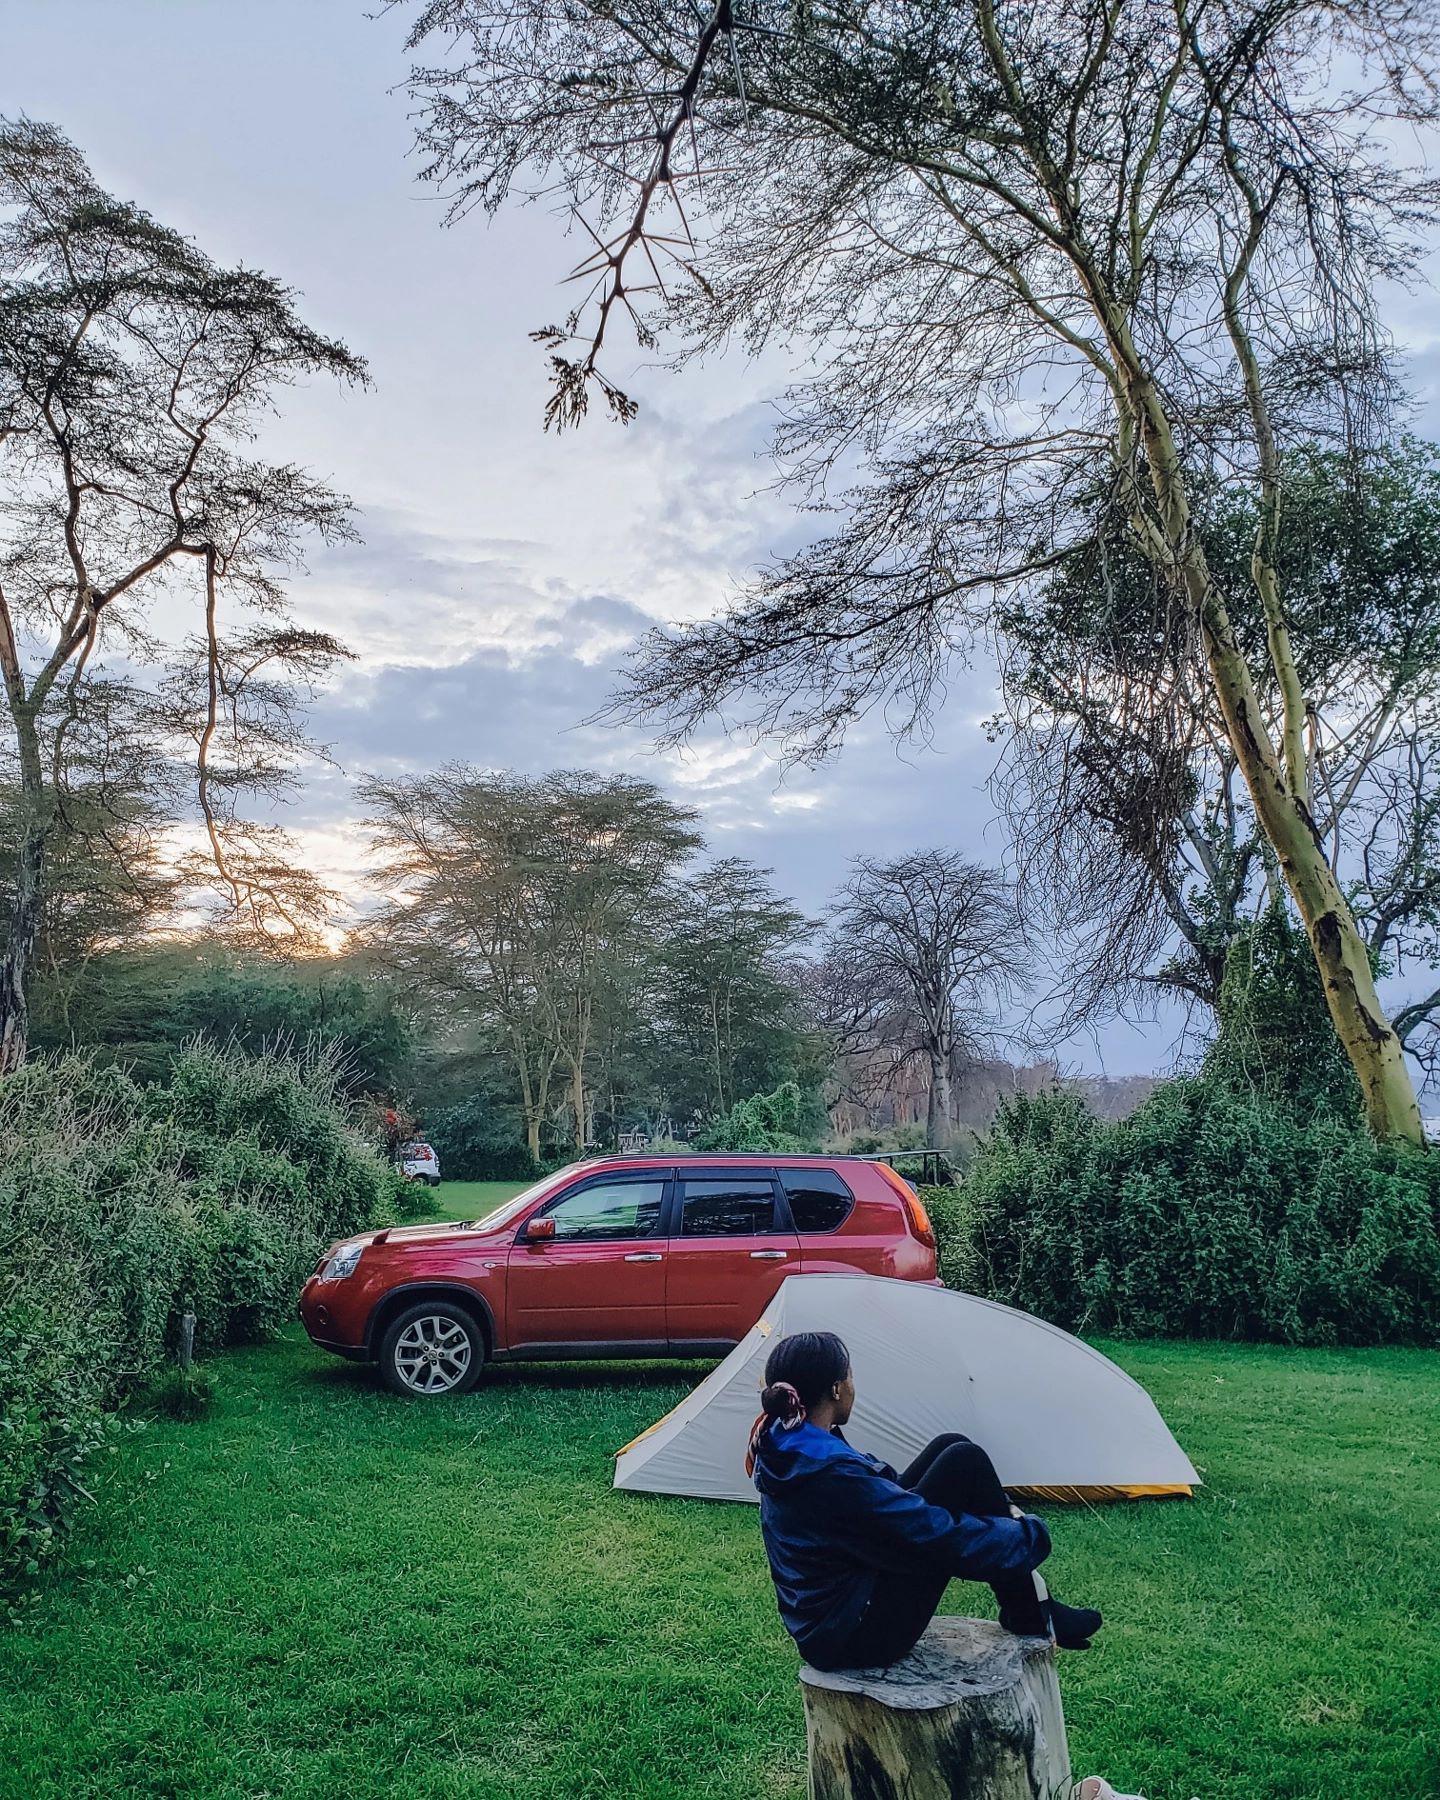 Camping in Naivasha was fun. Excited to do it again!